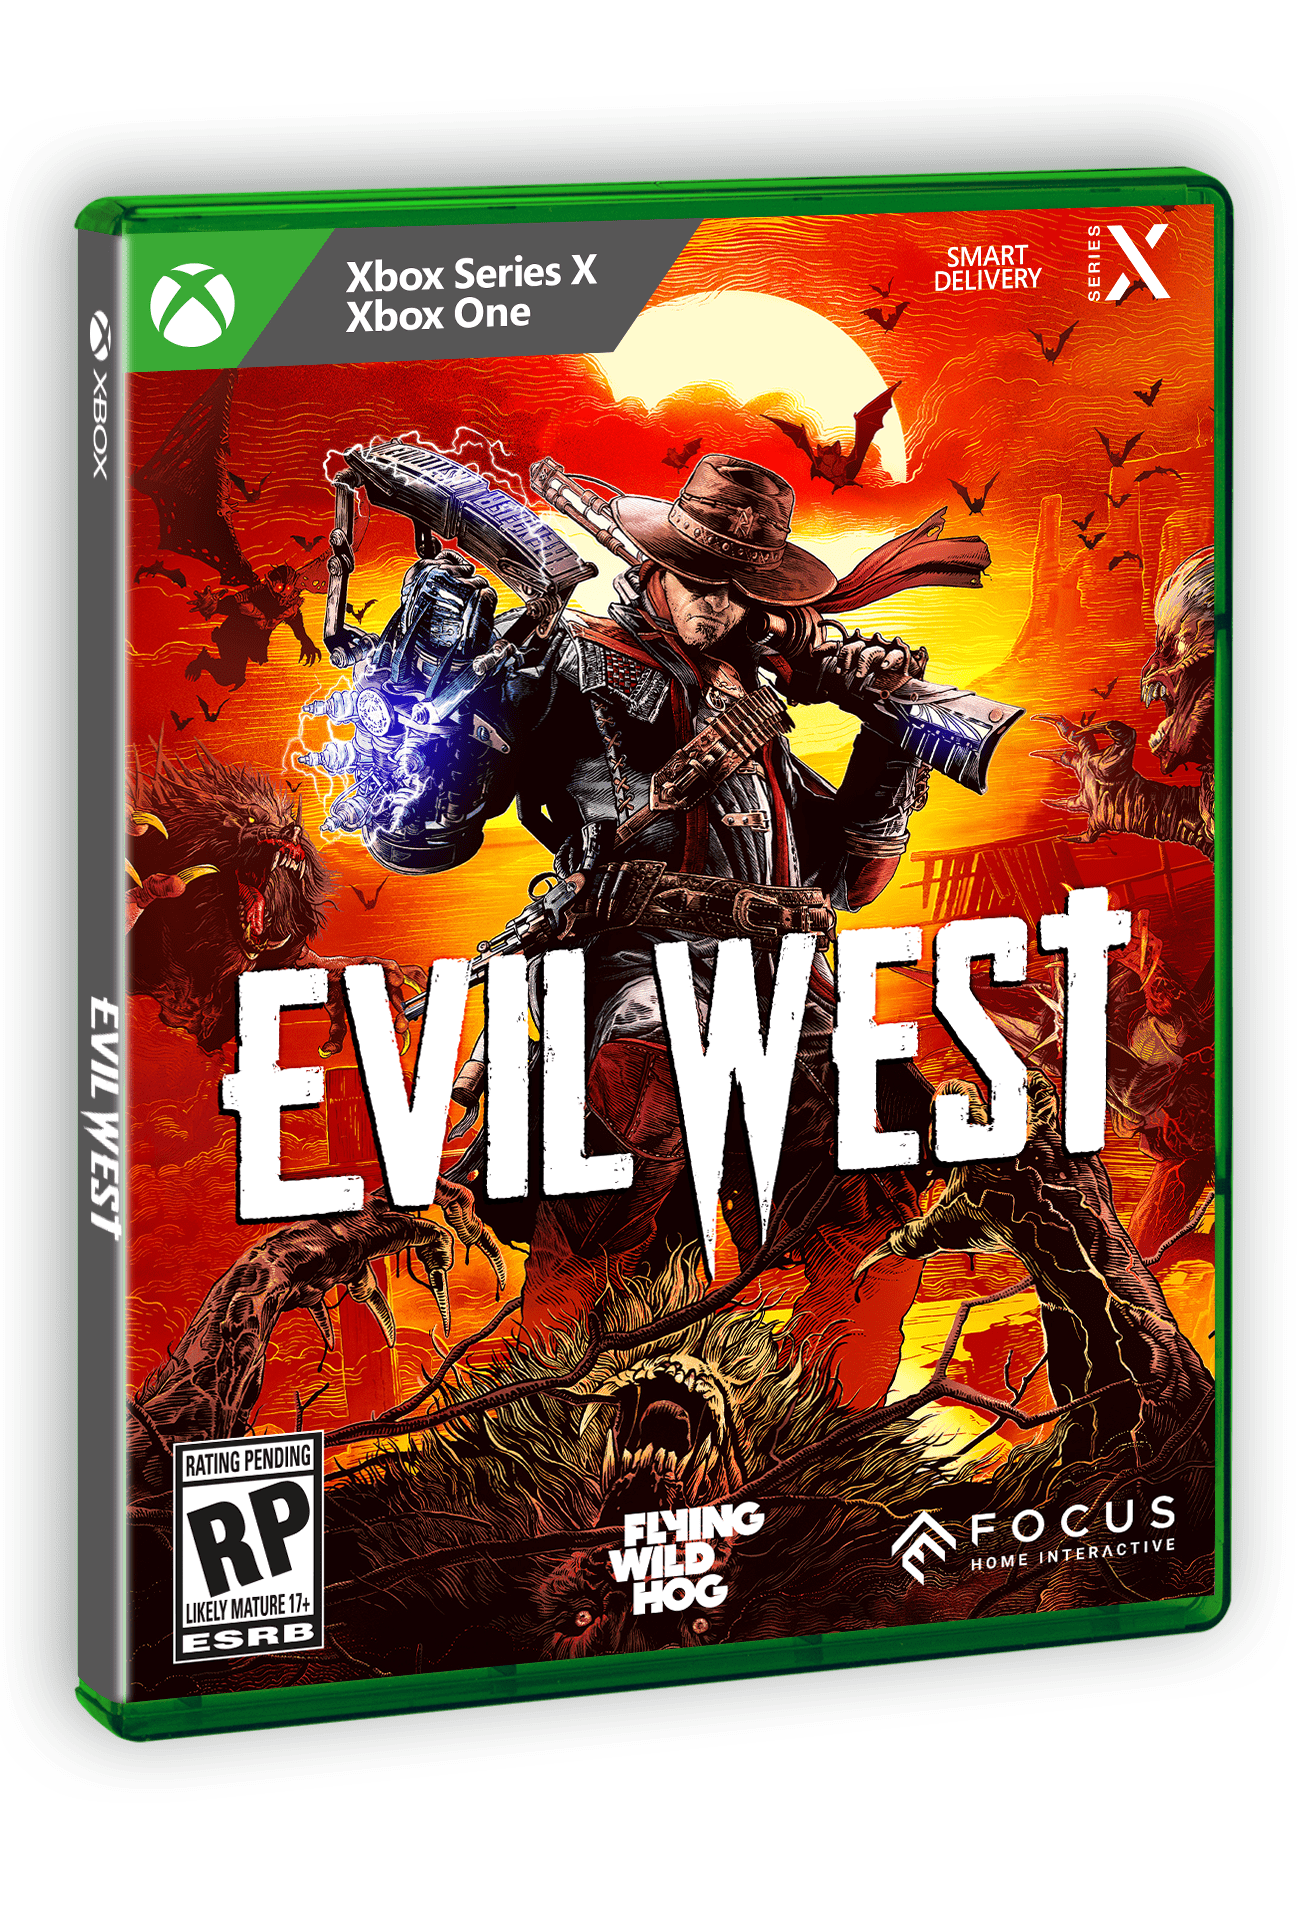 Evil West' is a shooter that'll take you to hell and back